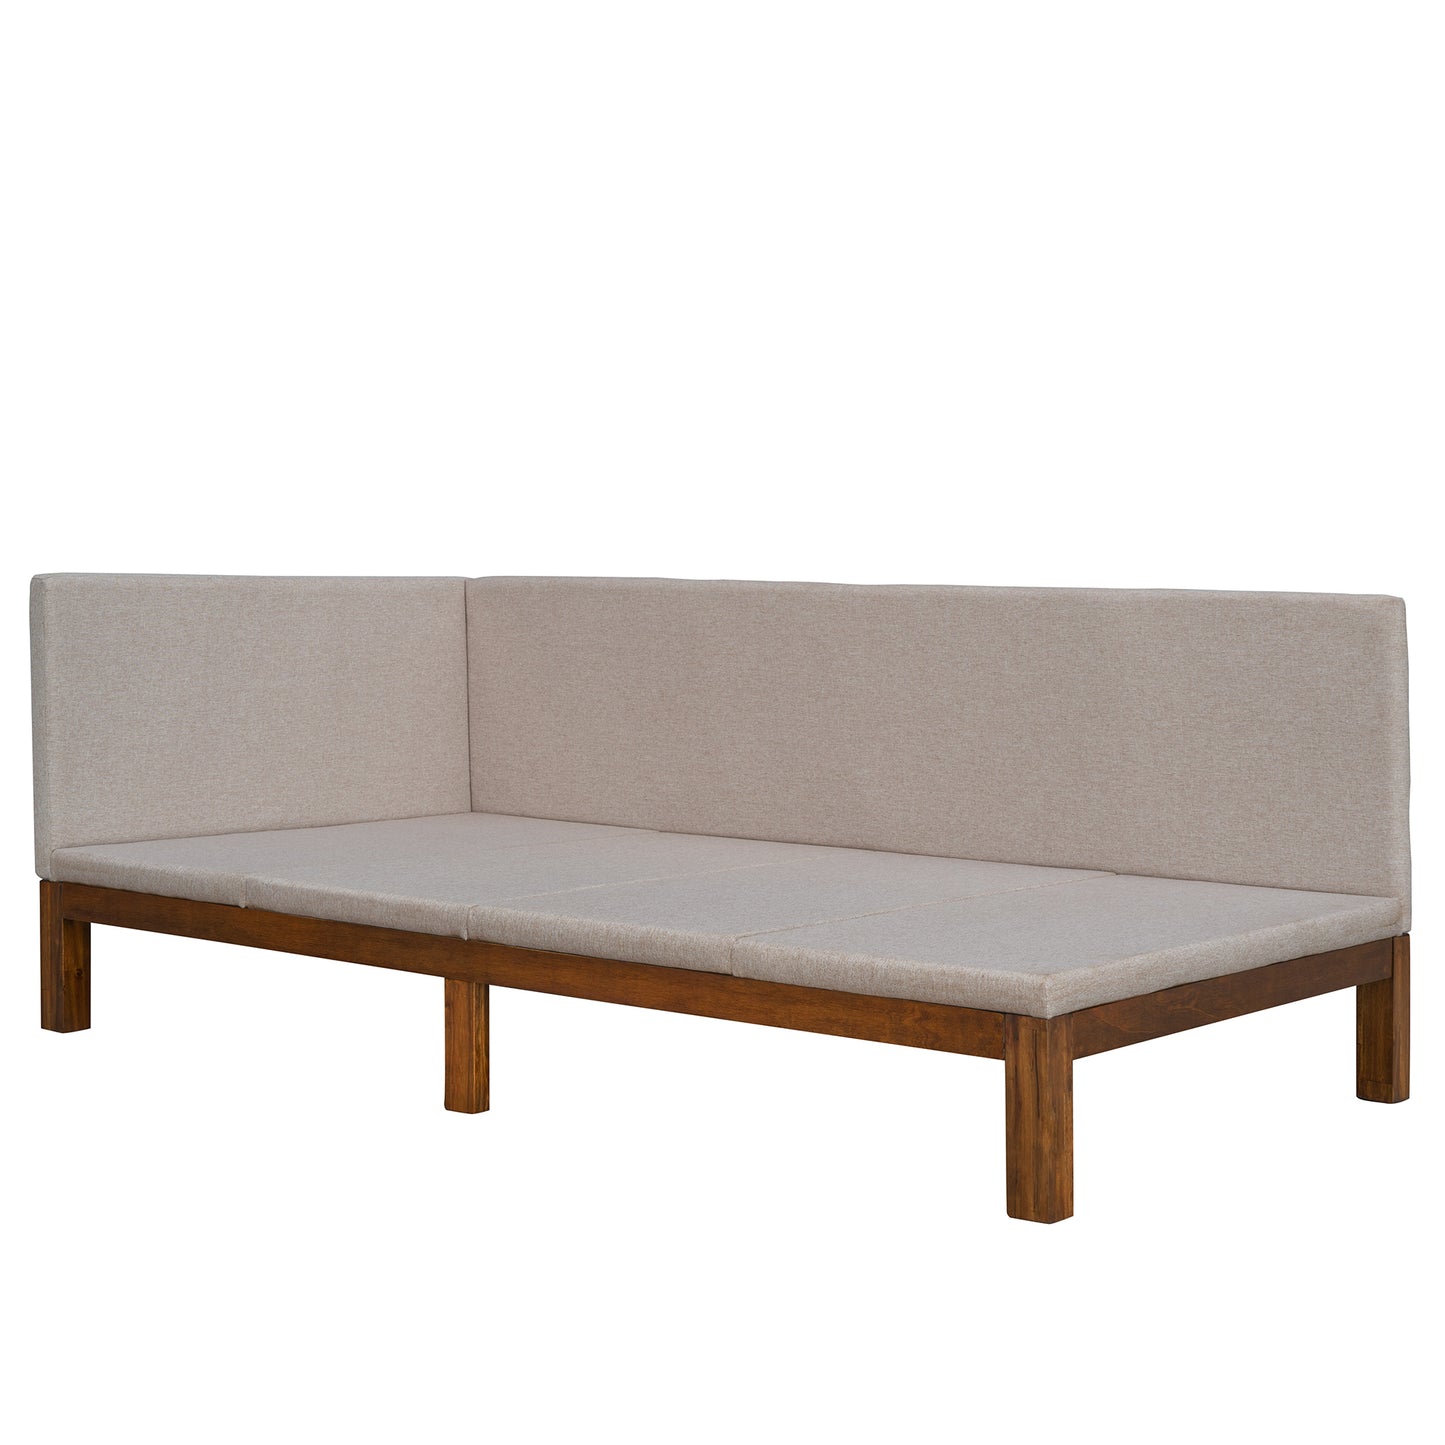 Upholstered Daybed/Sofa Bed Frame Twin Size Linen-Beige